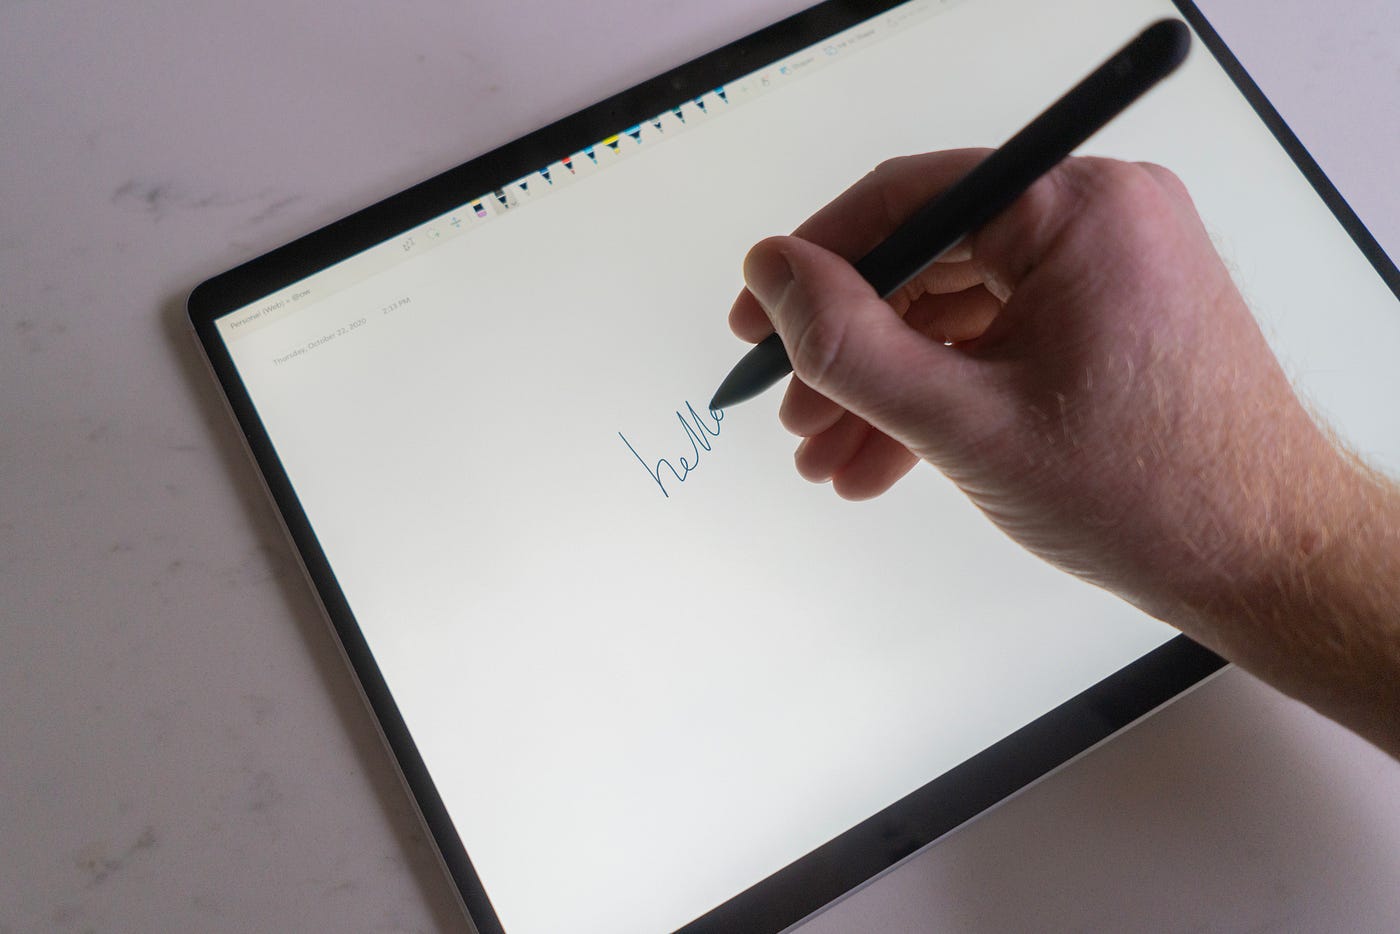 The Microsoft Surface Pro 7 Is Hard to Fault, by Owen Williams